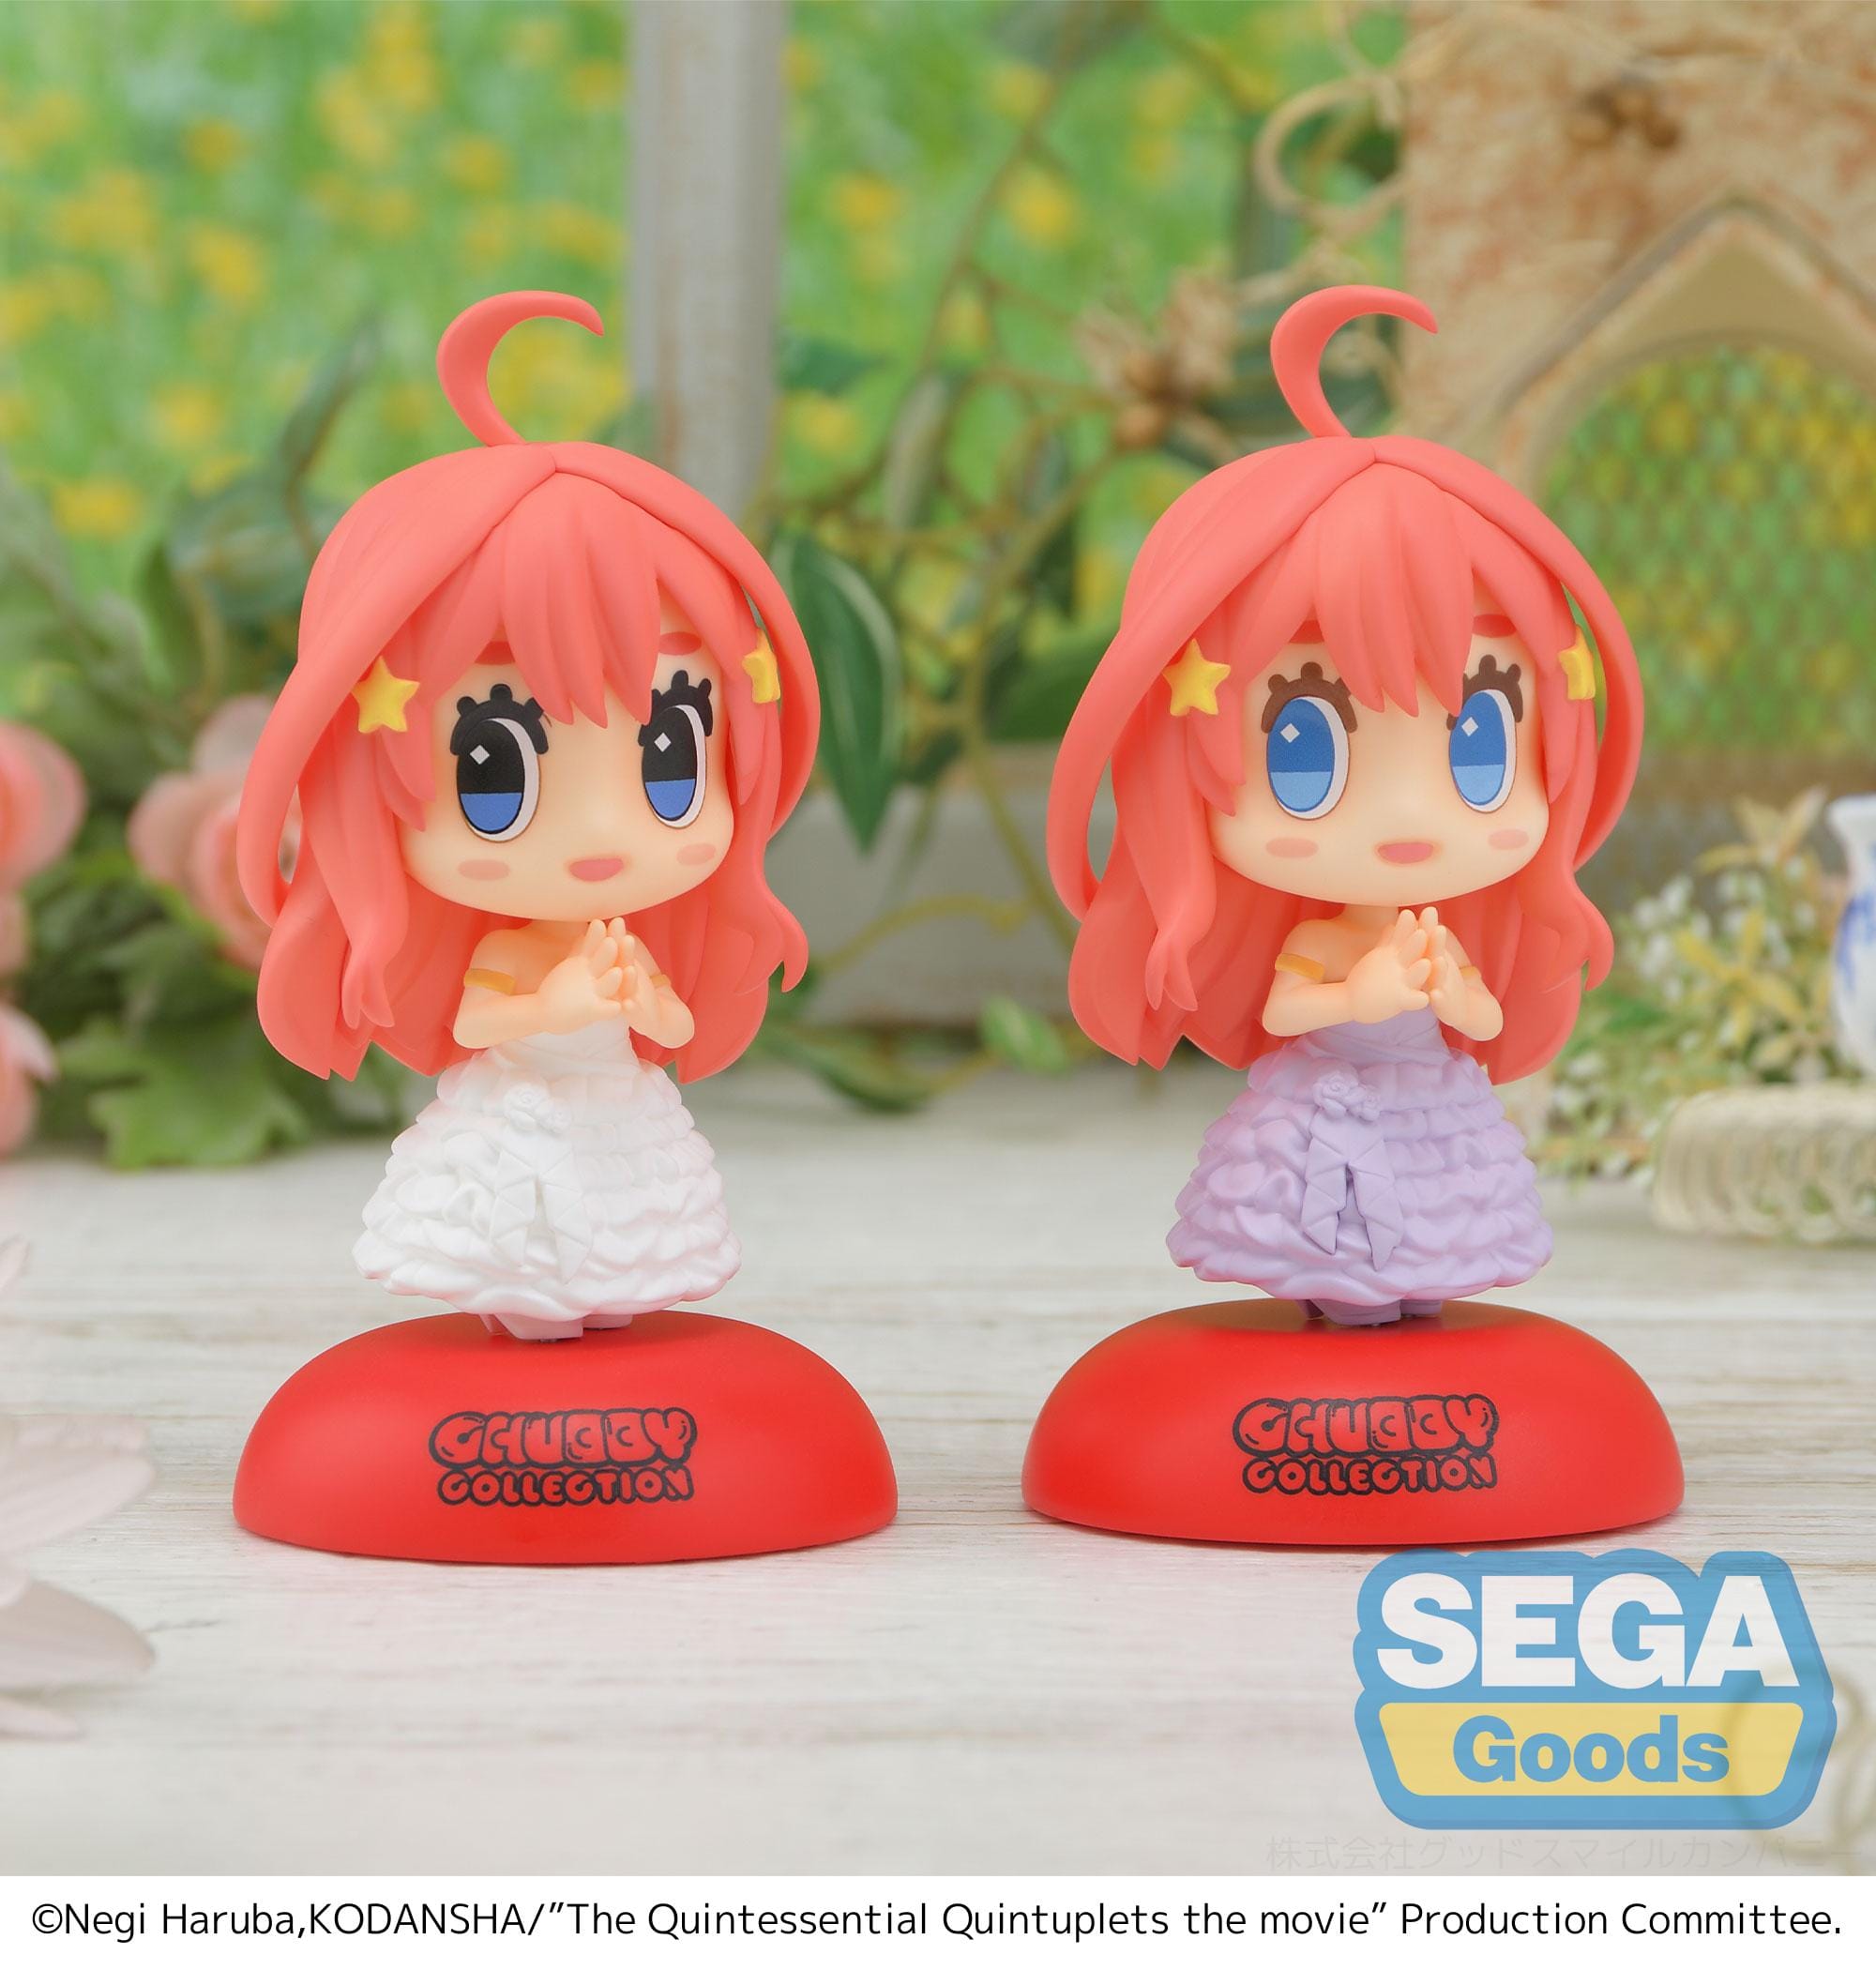 SEGA The Quintessential Quintuplets Movie Itsuki Nakano CHUBBY COLLECTION MP Figure